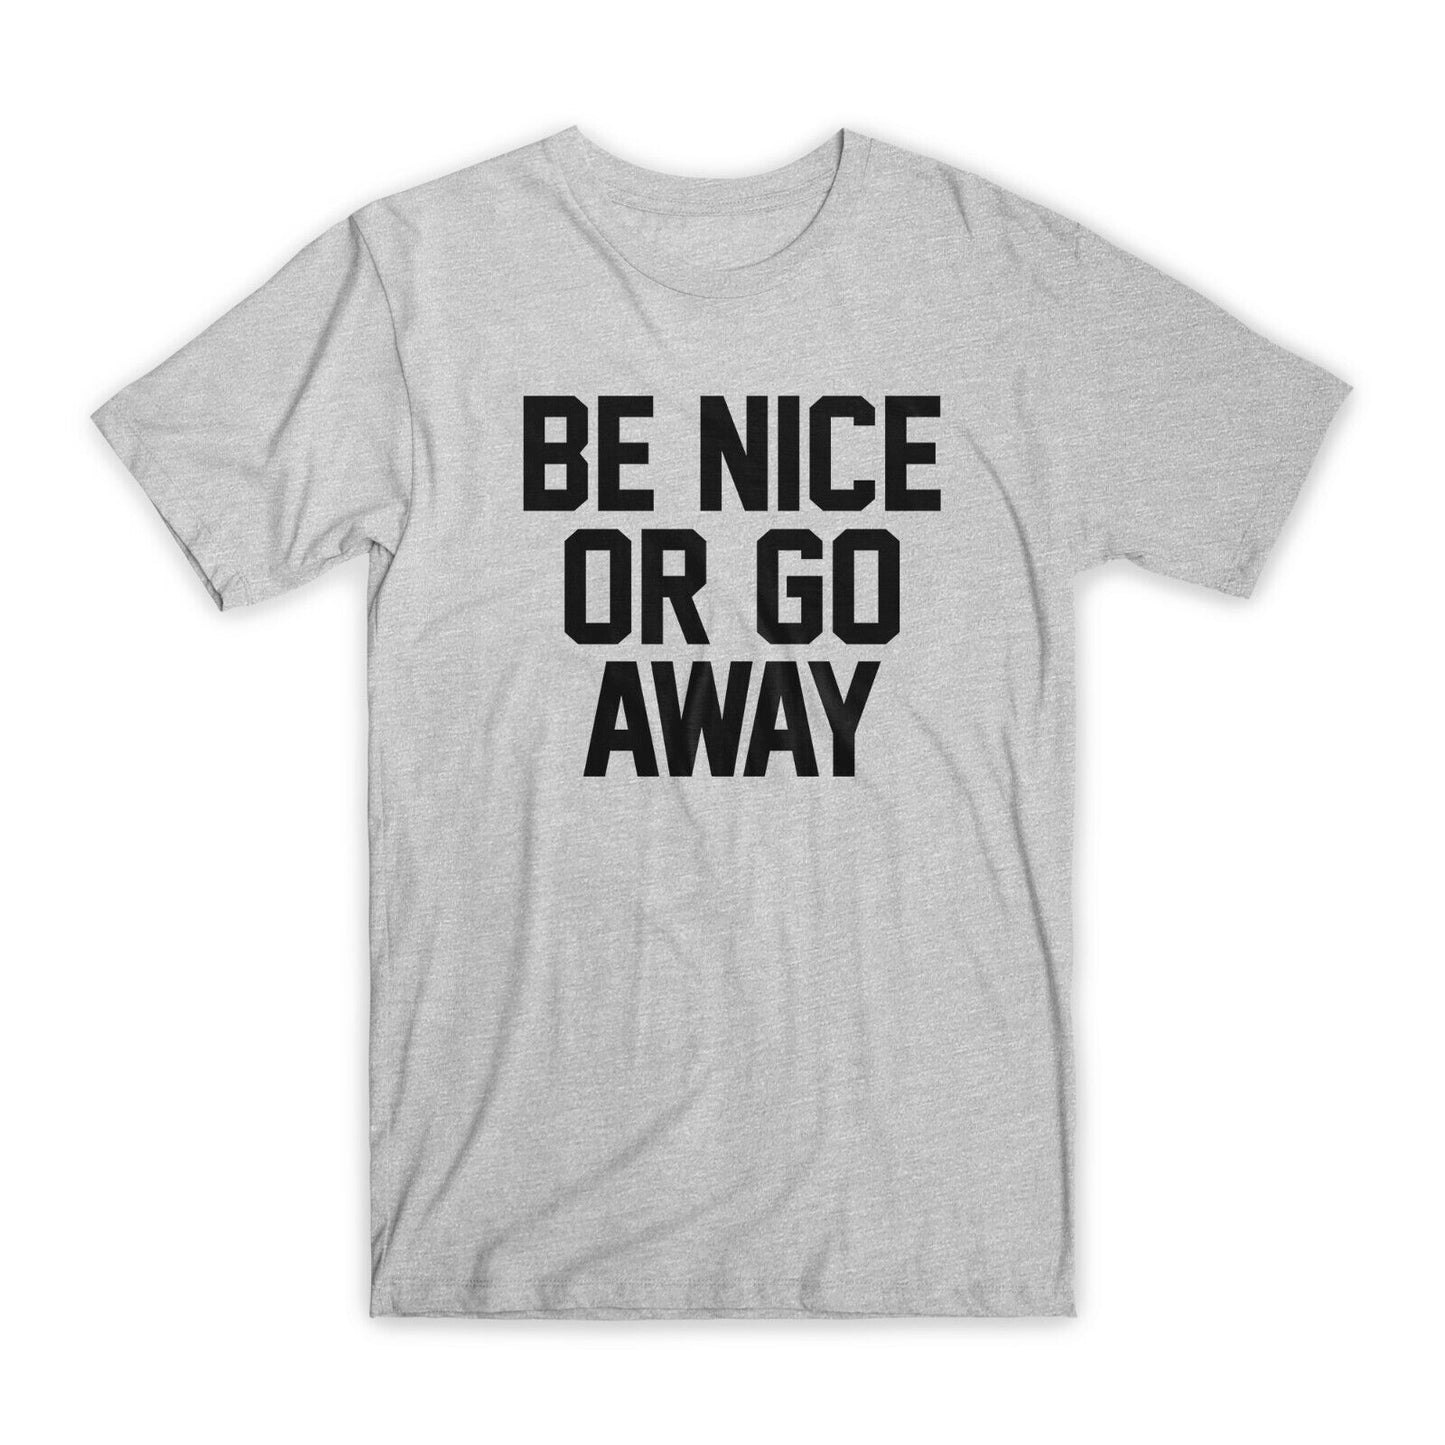 Be Nice or Go Away T-Shirt Premium Soft Cotton Crew Neck Funny Tees Gifts NEW